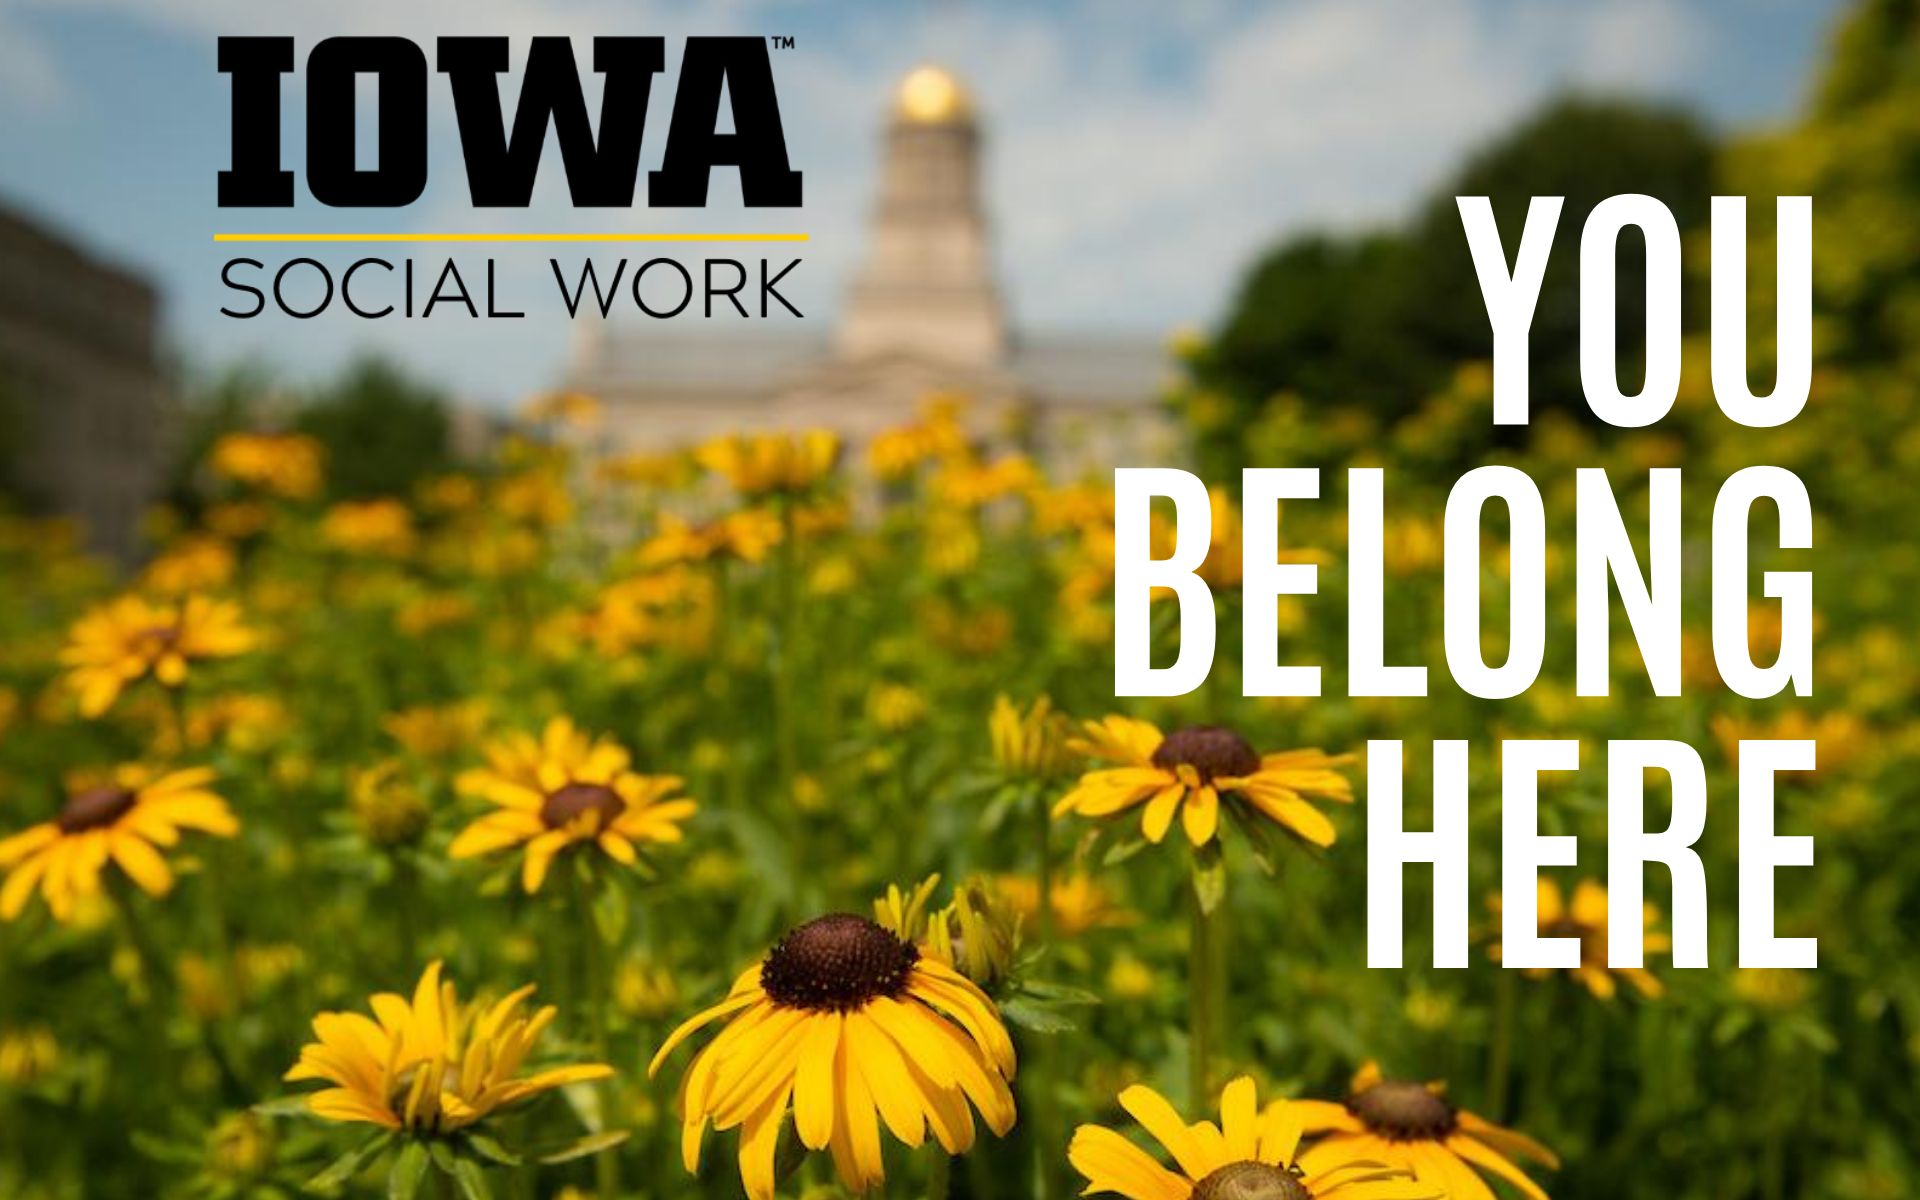 You belong here. Image of black-eyed susan flowers with Old Capitol in background.